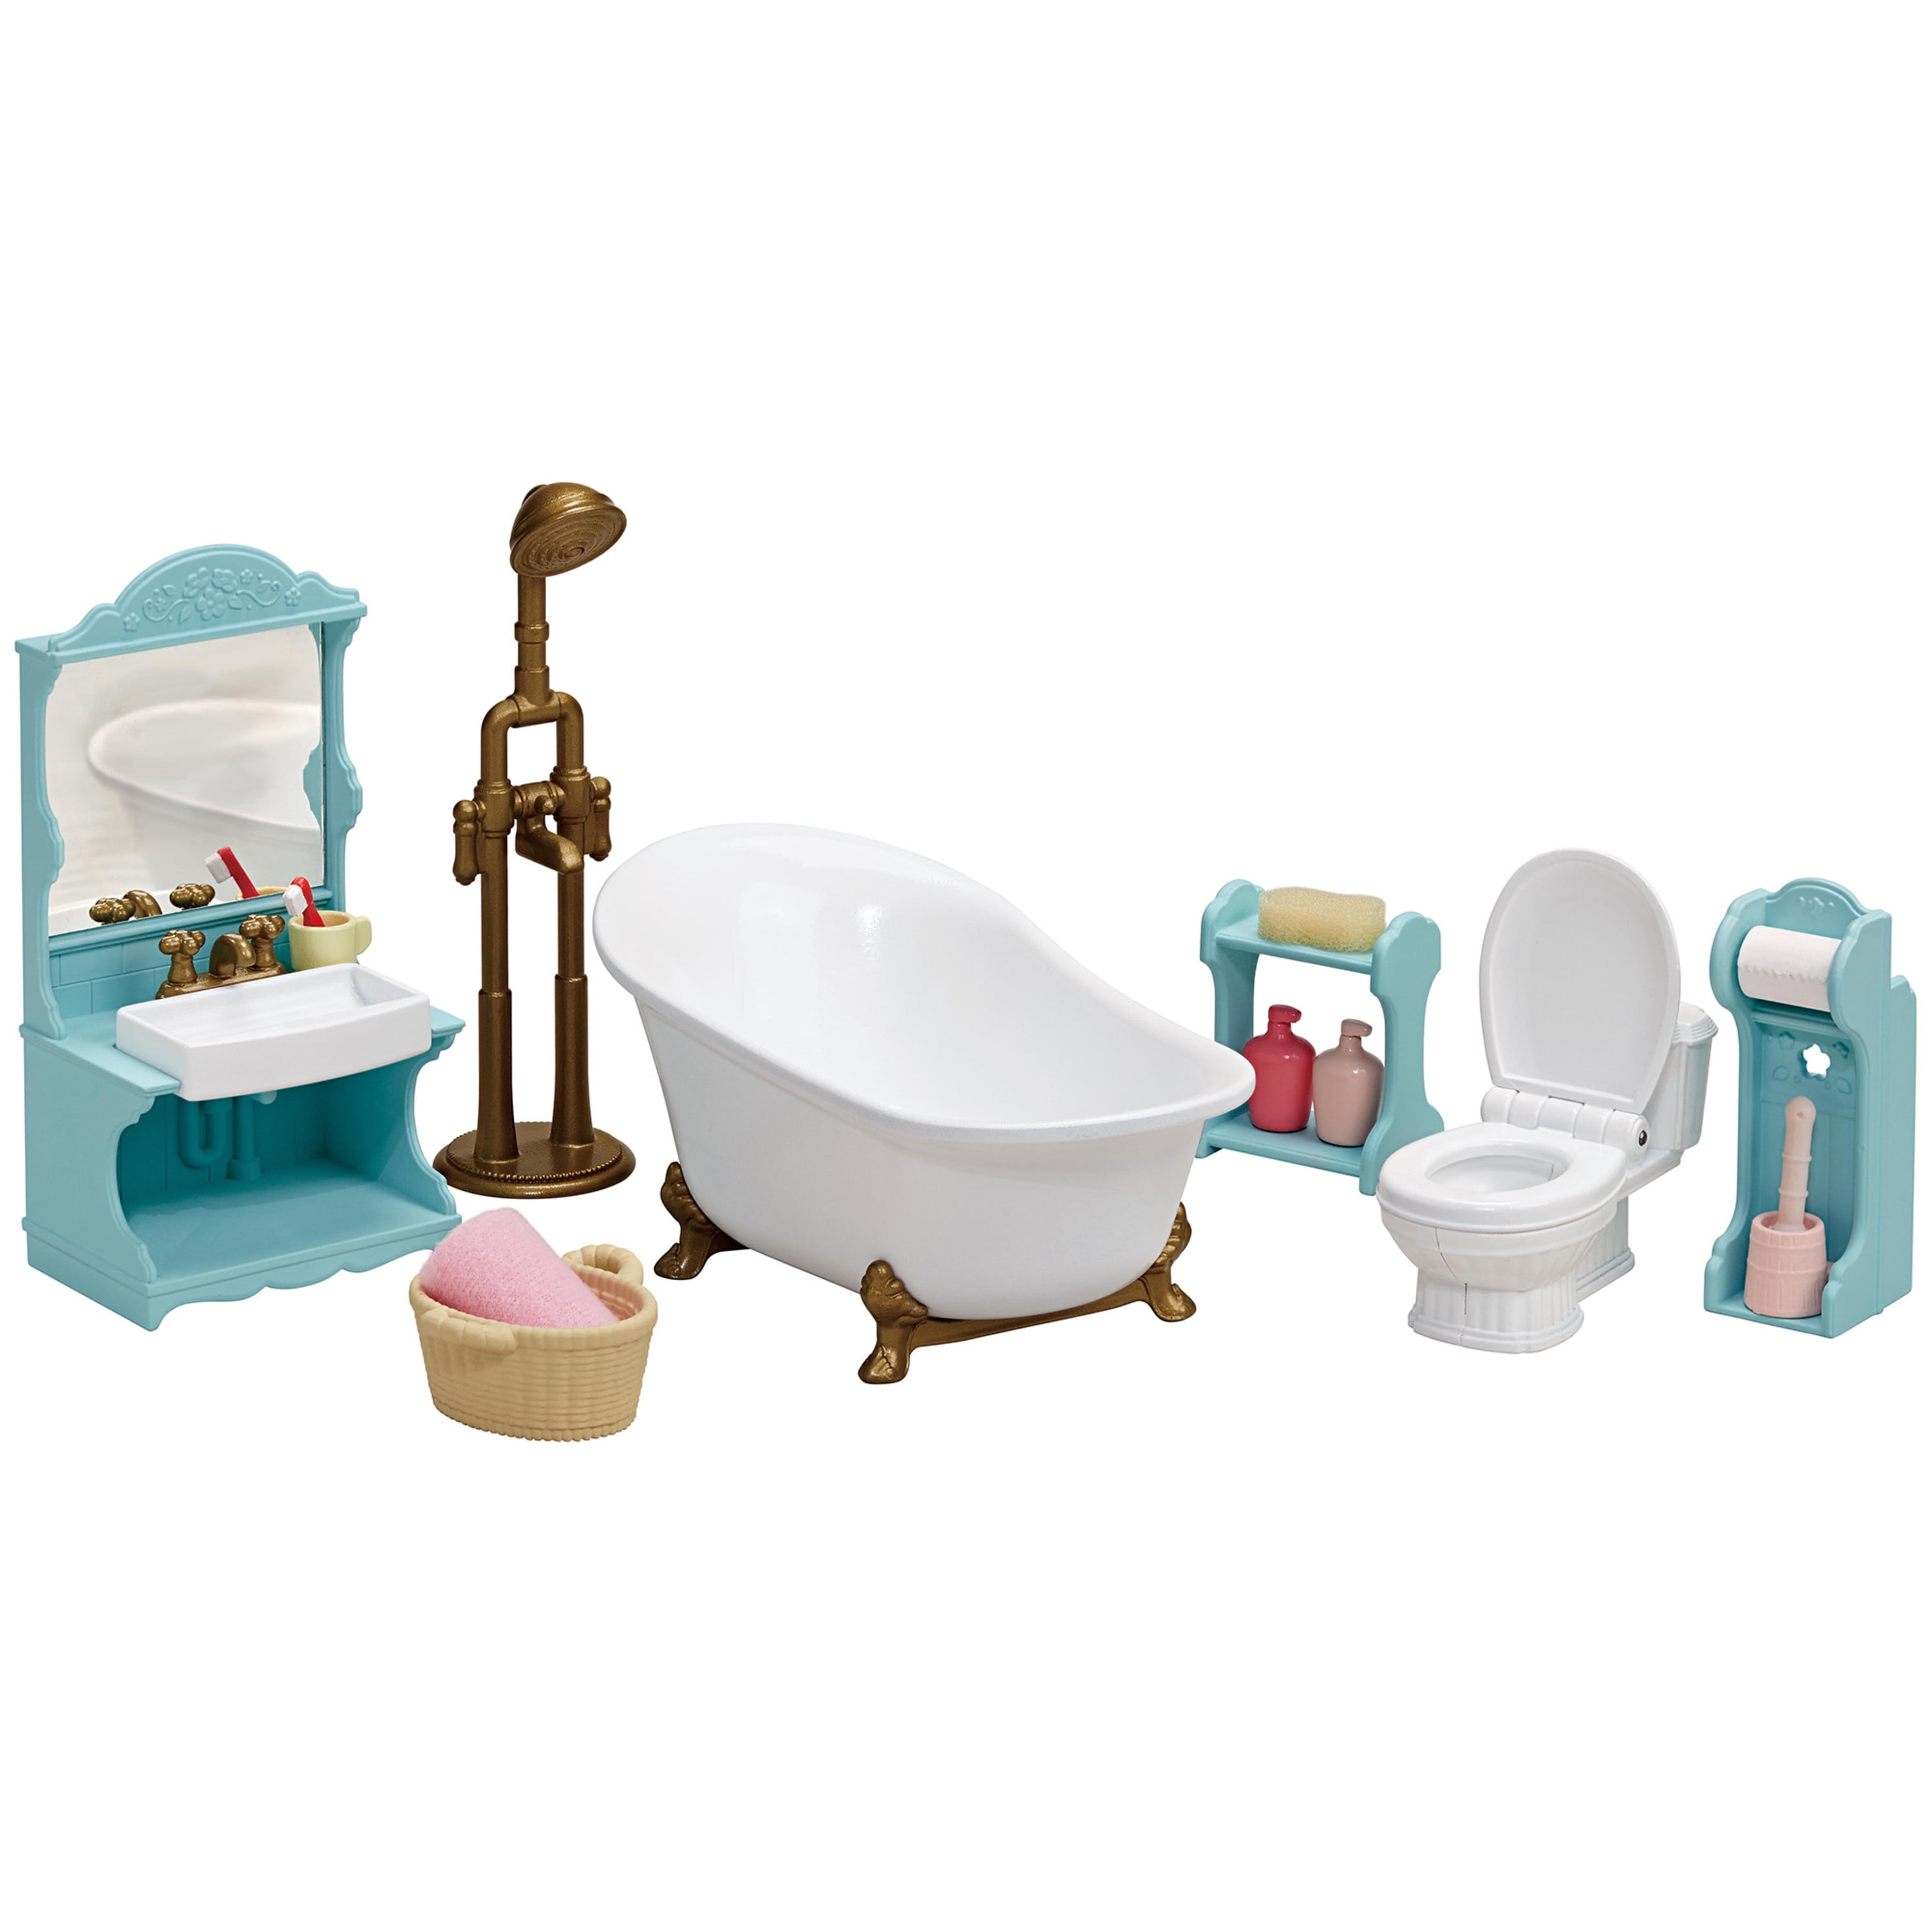 Calico Critters Deluxe Bathroom components 15pc set 